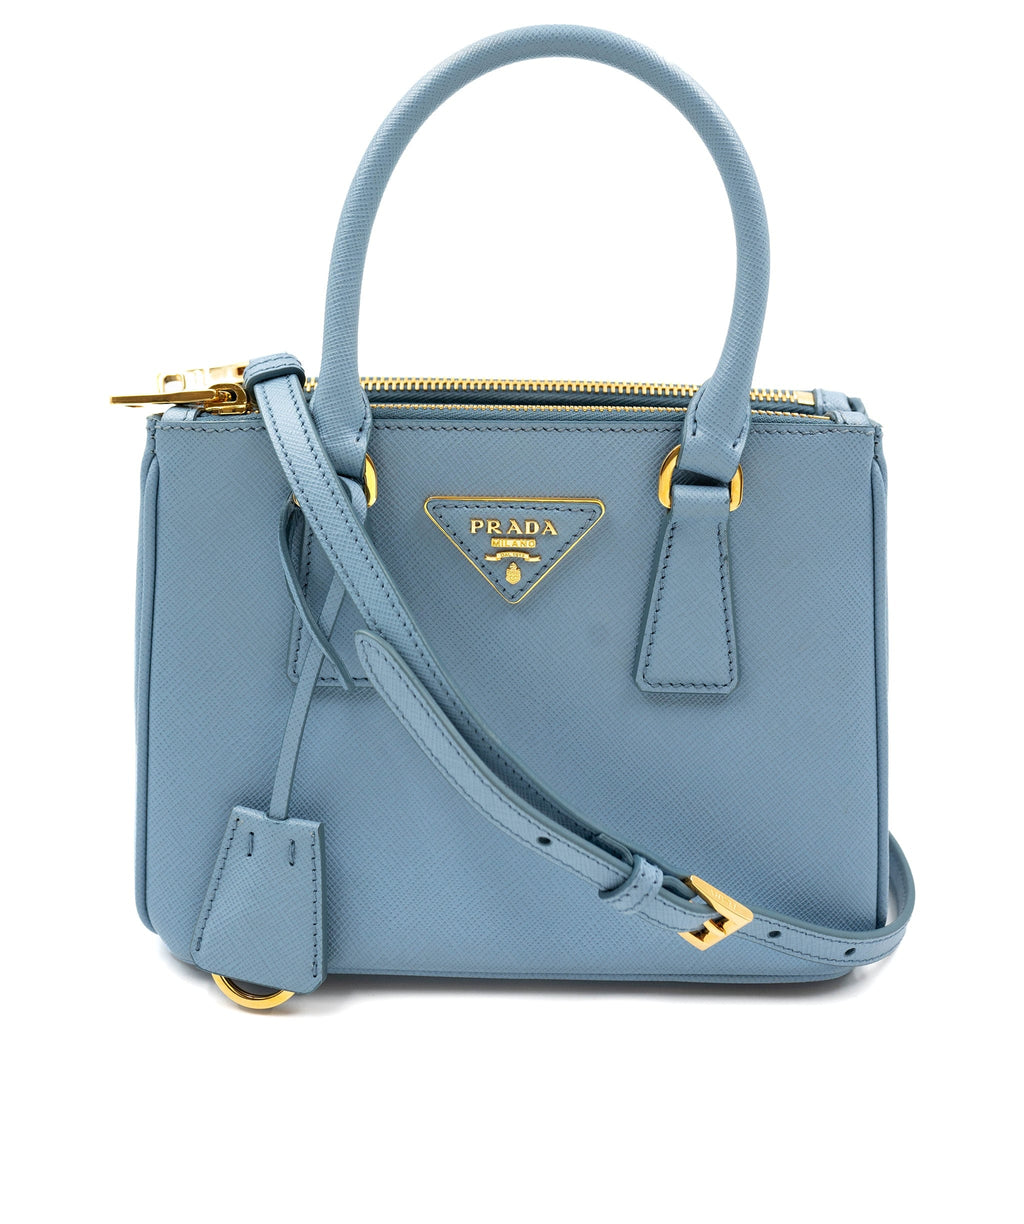 Prada Baby Blue Saffiano Leather Micro Bag w/ Strap Prada Visit our store  online today! Stop by now